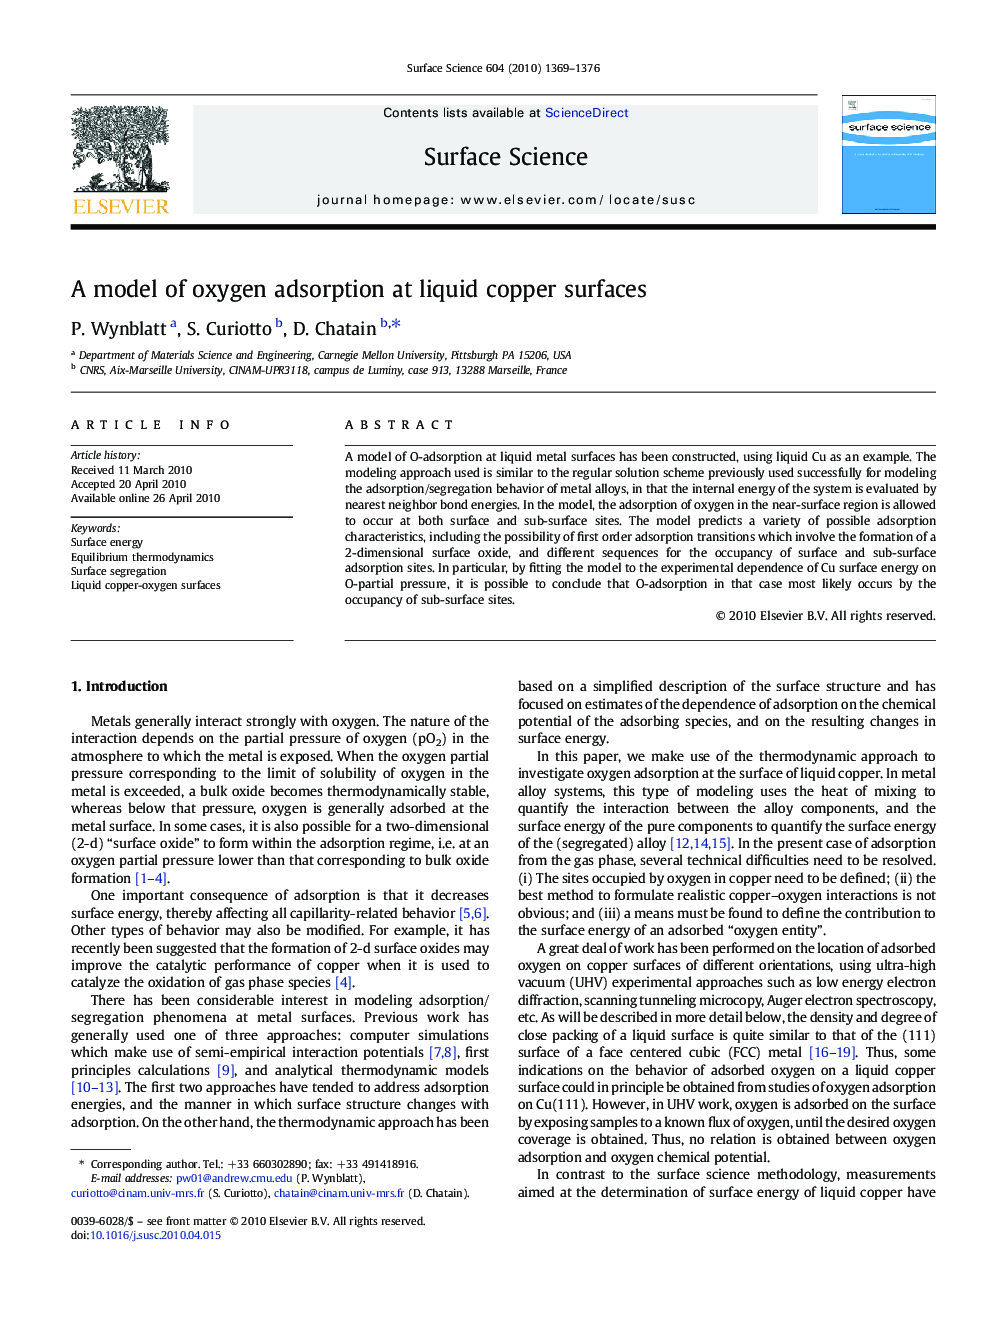 A model of oxygen adsorption at liquid copper surfaces